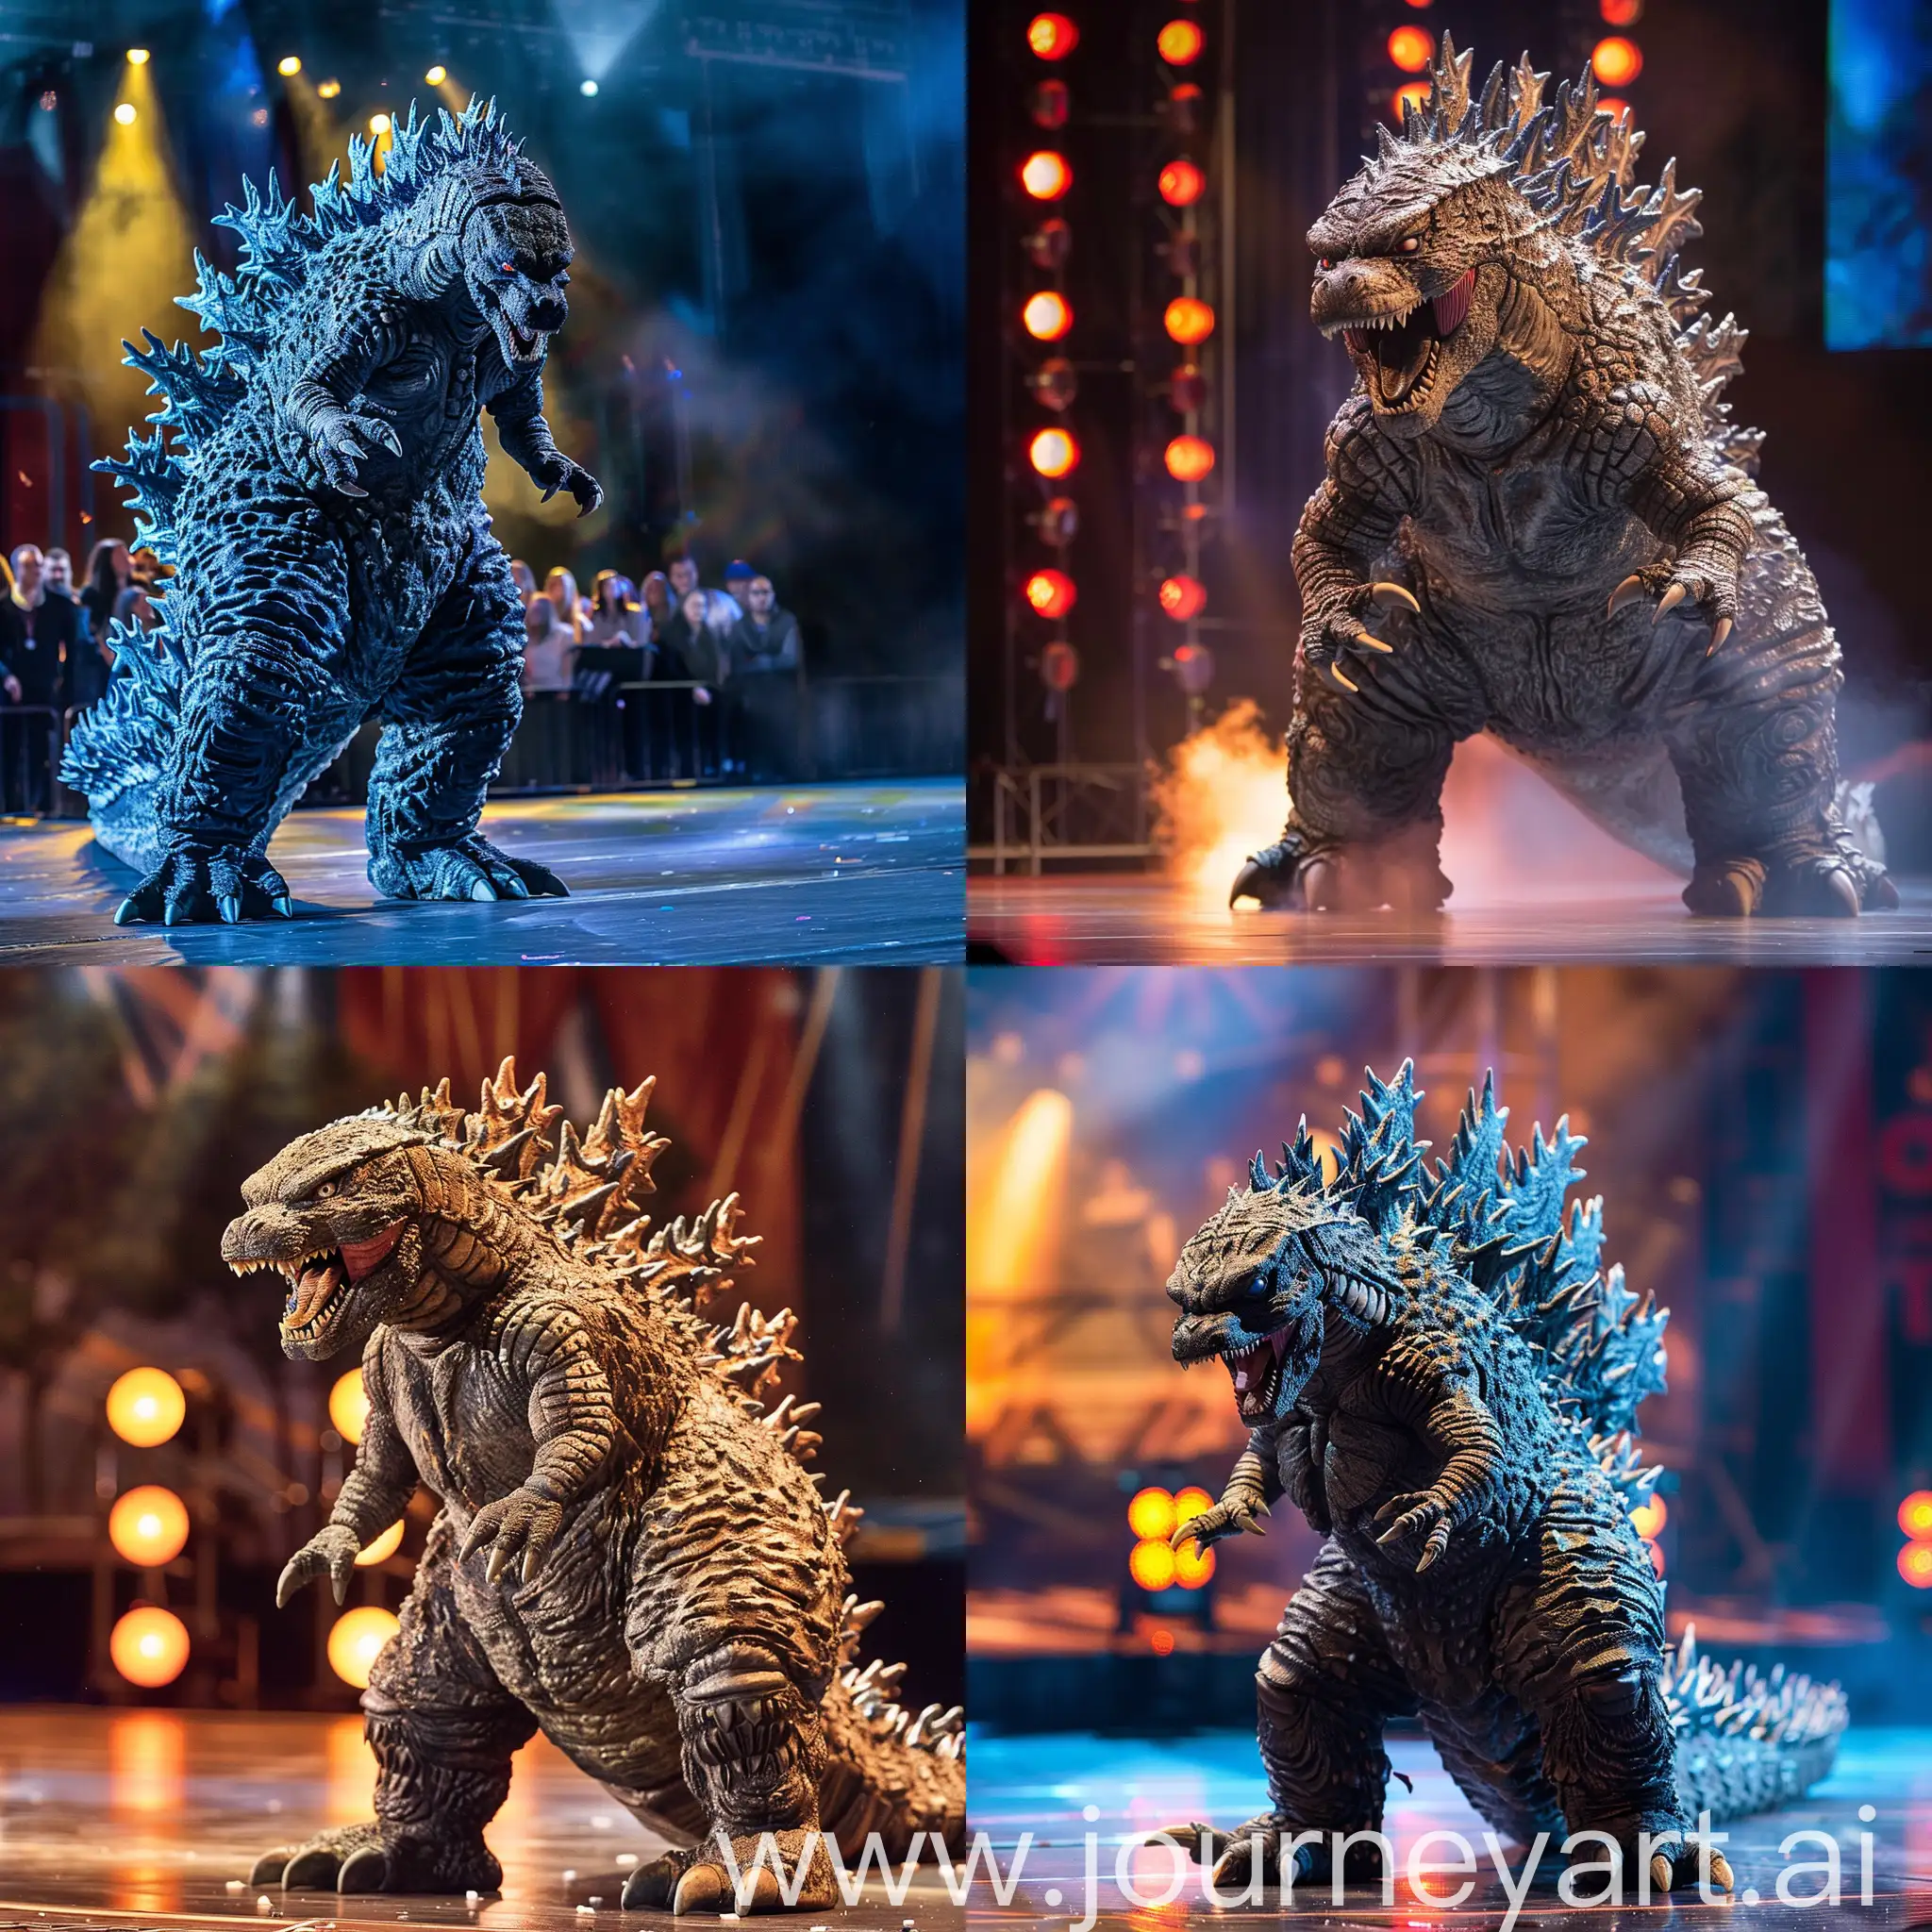 A Godzilla is attacking the audience in the Got Talent arena - totally real